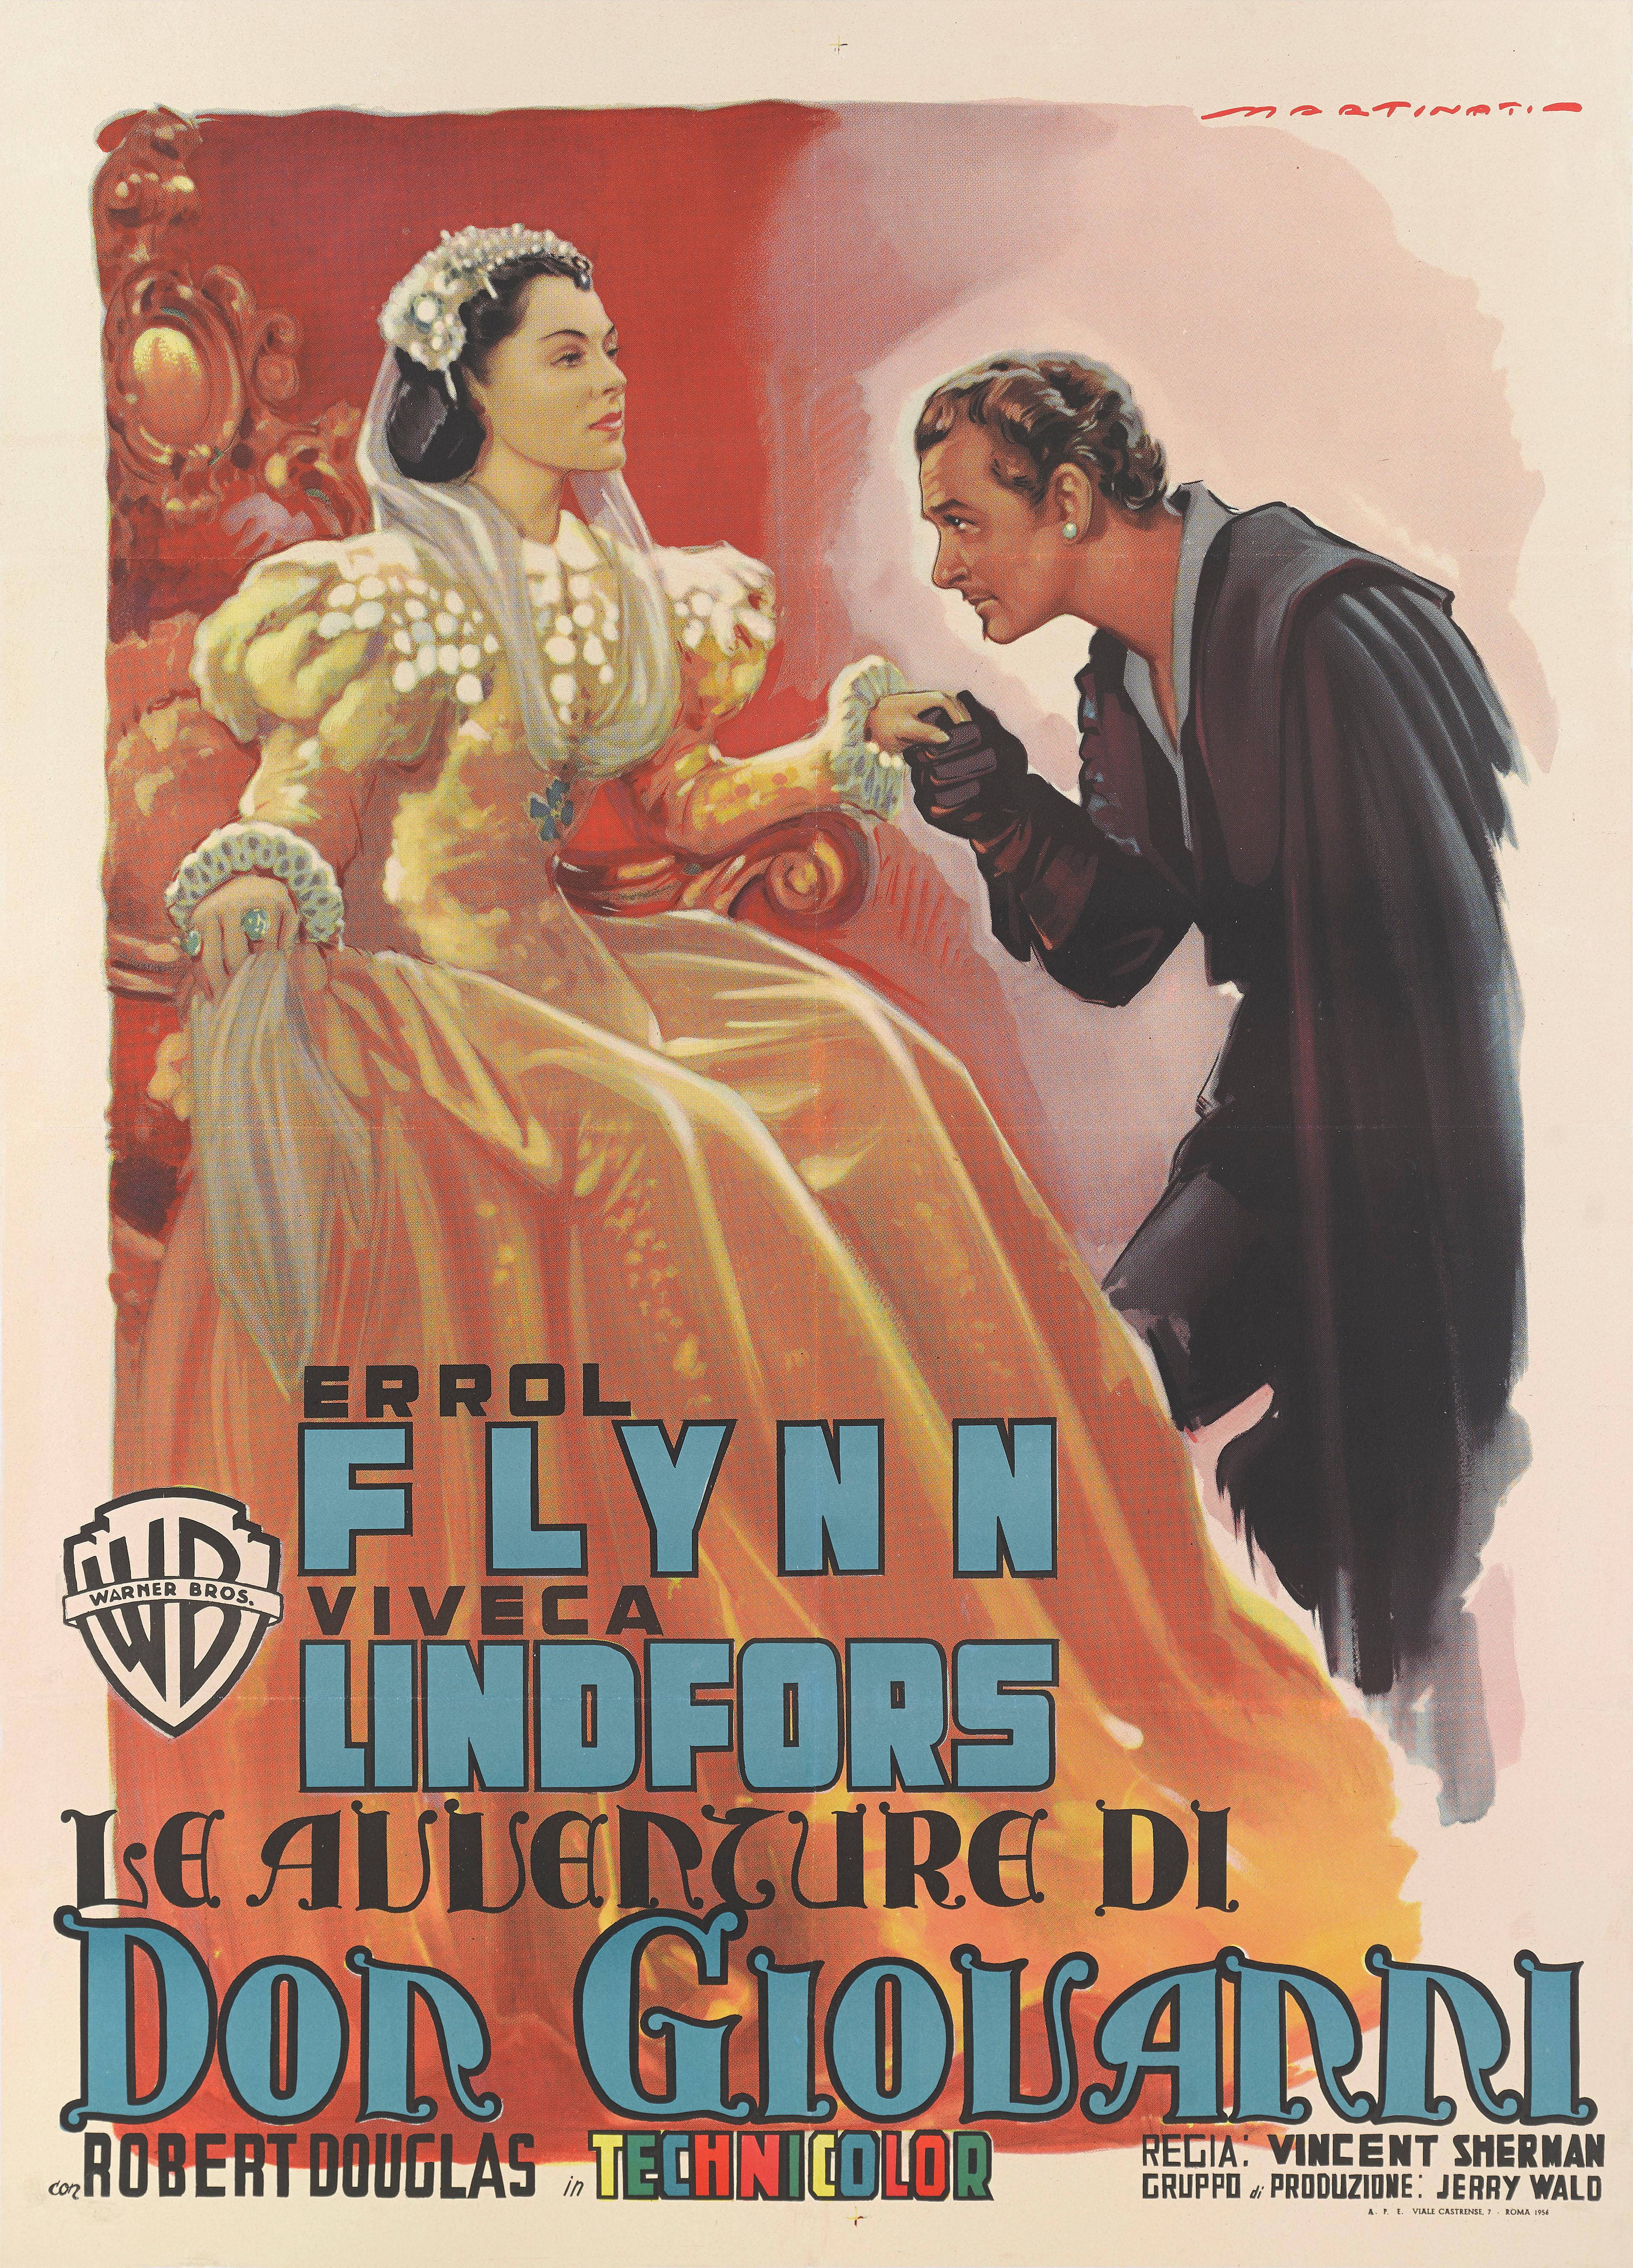 Original Italian film poster for Don June. This was Errol Flynn's last big budget.
Movie and a perfect role for Flynn. The poster features beautiful artwork by the renowned Italian poster designer Luigi Martinati (1893-1984).